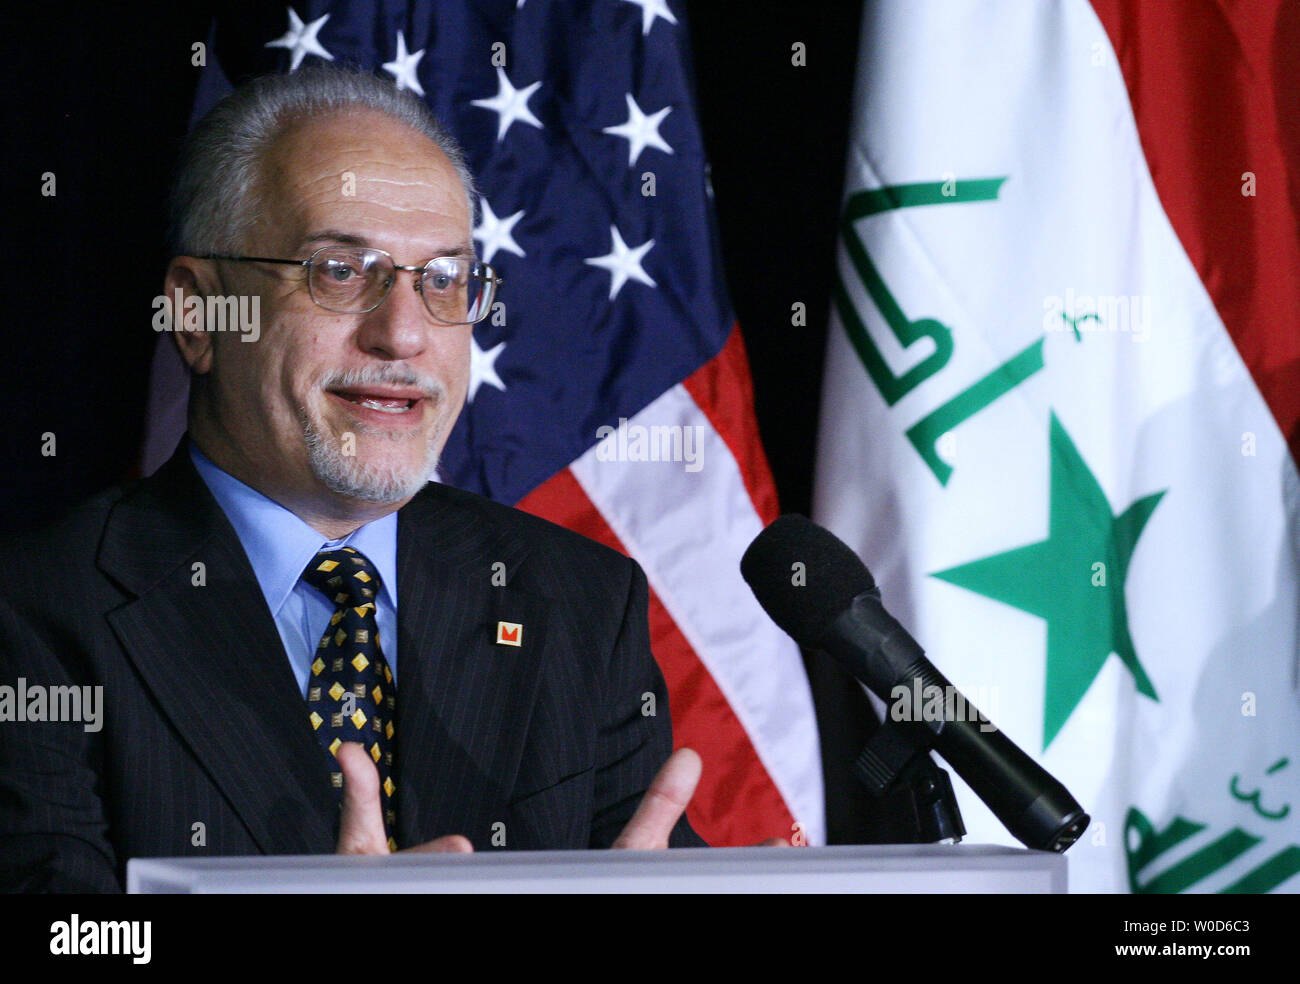 Iraqi Minister of Oil Hussein al-Shahristani answers reporters' questions at a joint press conference with the U.S. Energy Department Secretary at the Energy Department in Washington on July 26, 2006. The bureaucrats spoke of reestablishing Iraq's crude oil production to prewar levels and of establishing strategic partnerships between the two countries' energy sectors.  (UPI Photos/Eduardo Sverdlin) Stock Photo